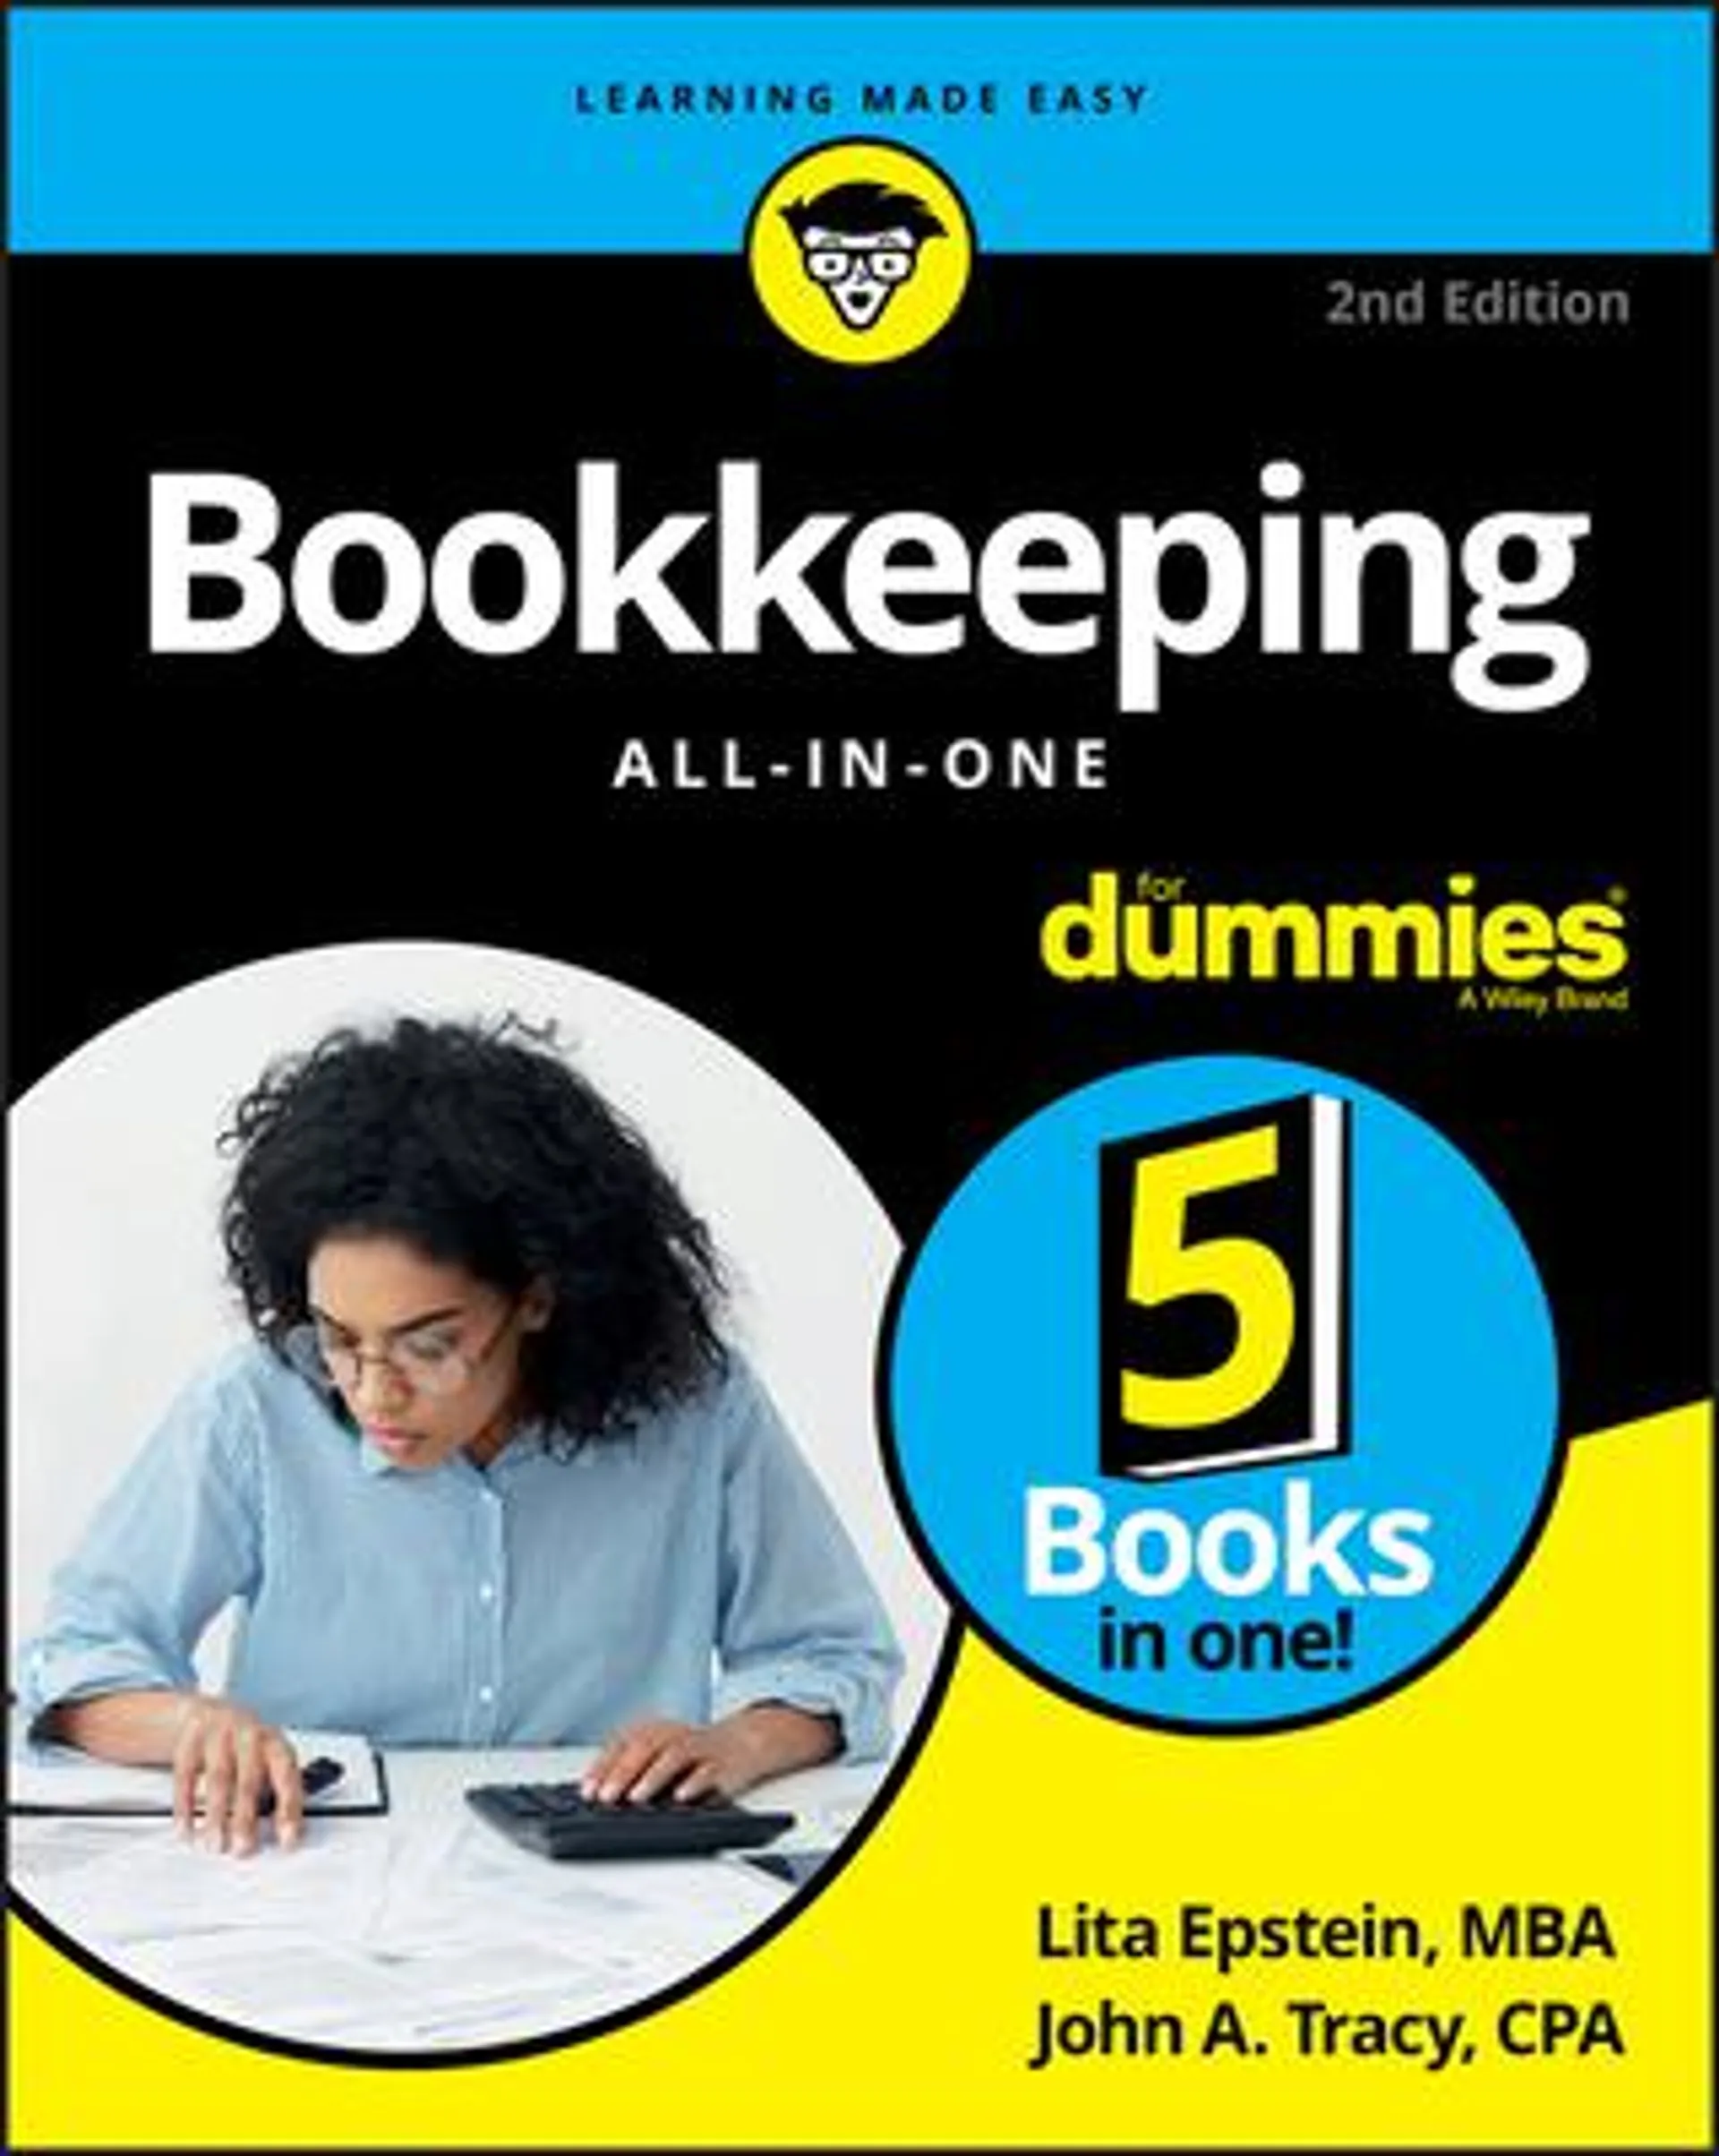 Bookkeeping All-In-One for Dummies (2nd edition)